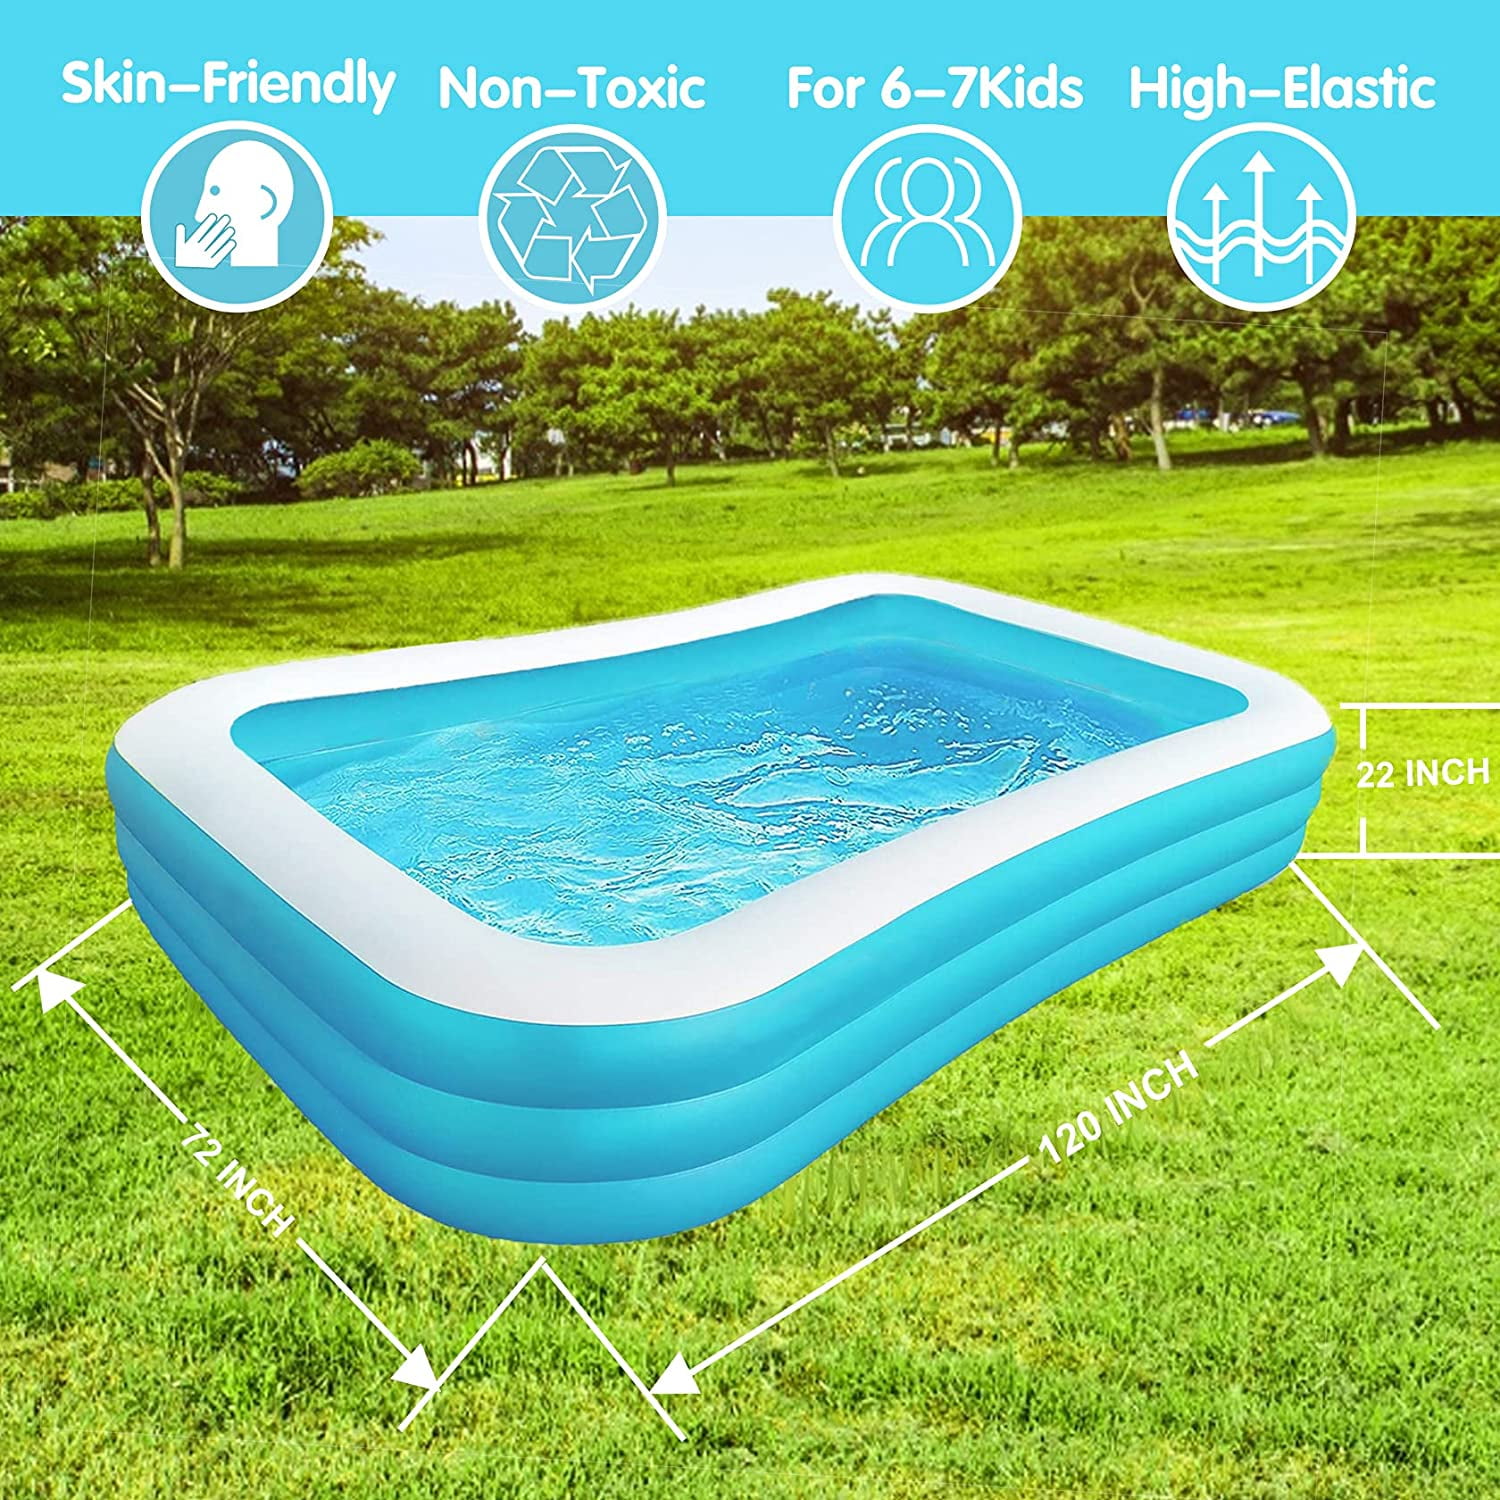 Details about   10 Ft x 72" Kids Children Inflatable Swimming Pool Large Family Summer Outdoor 